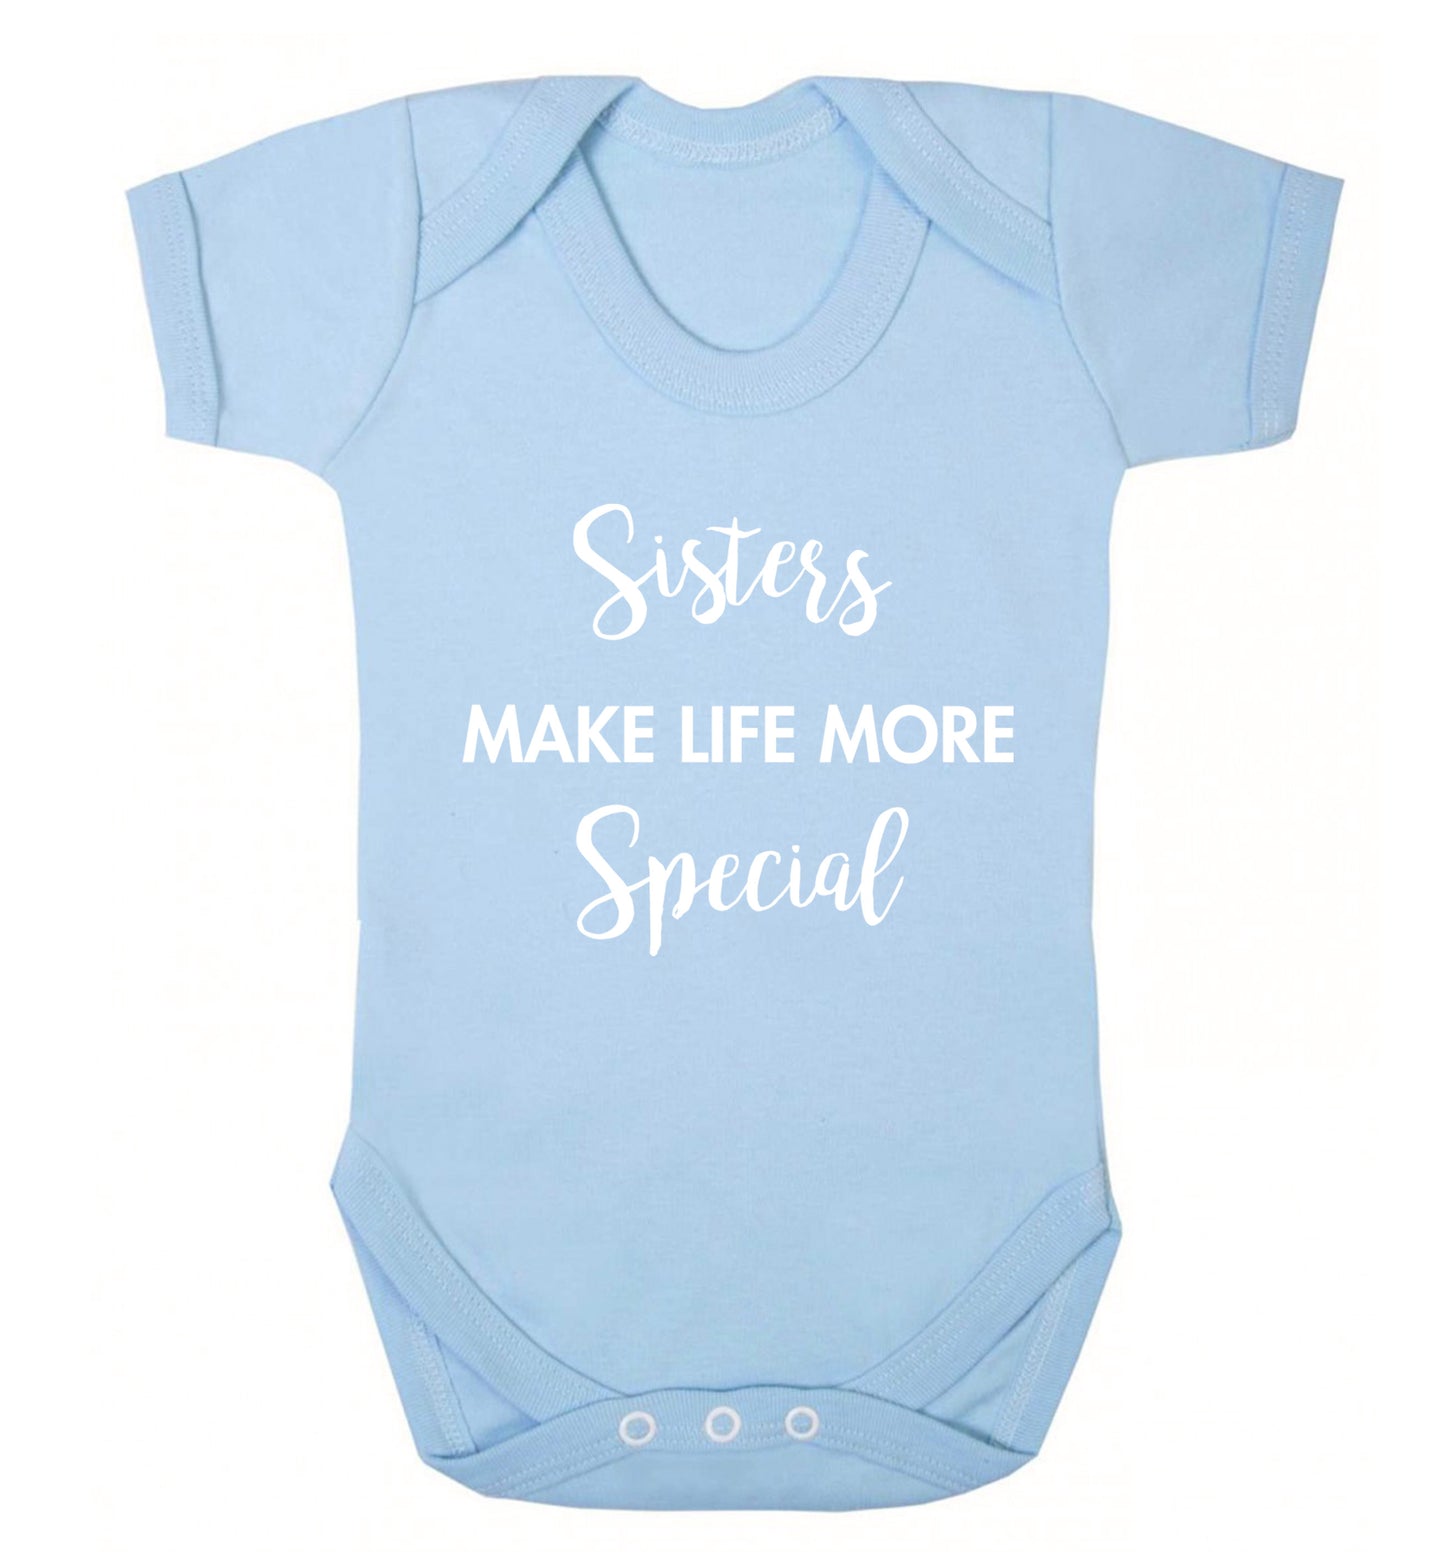 Sisters make life more special Baby Vest pale blue 18-24 months